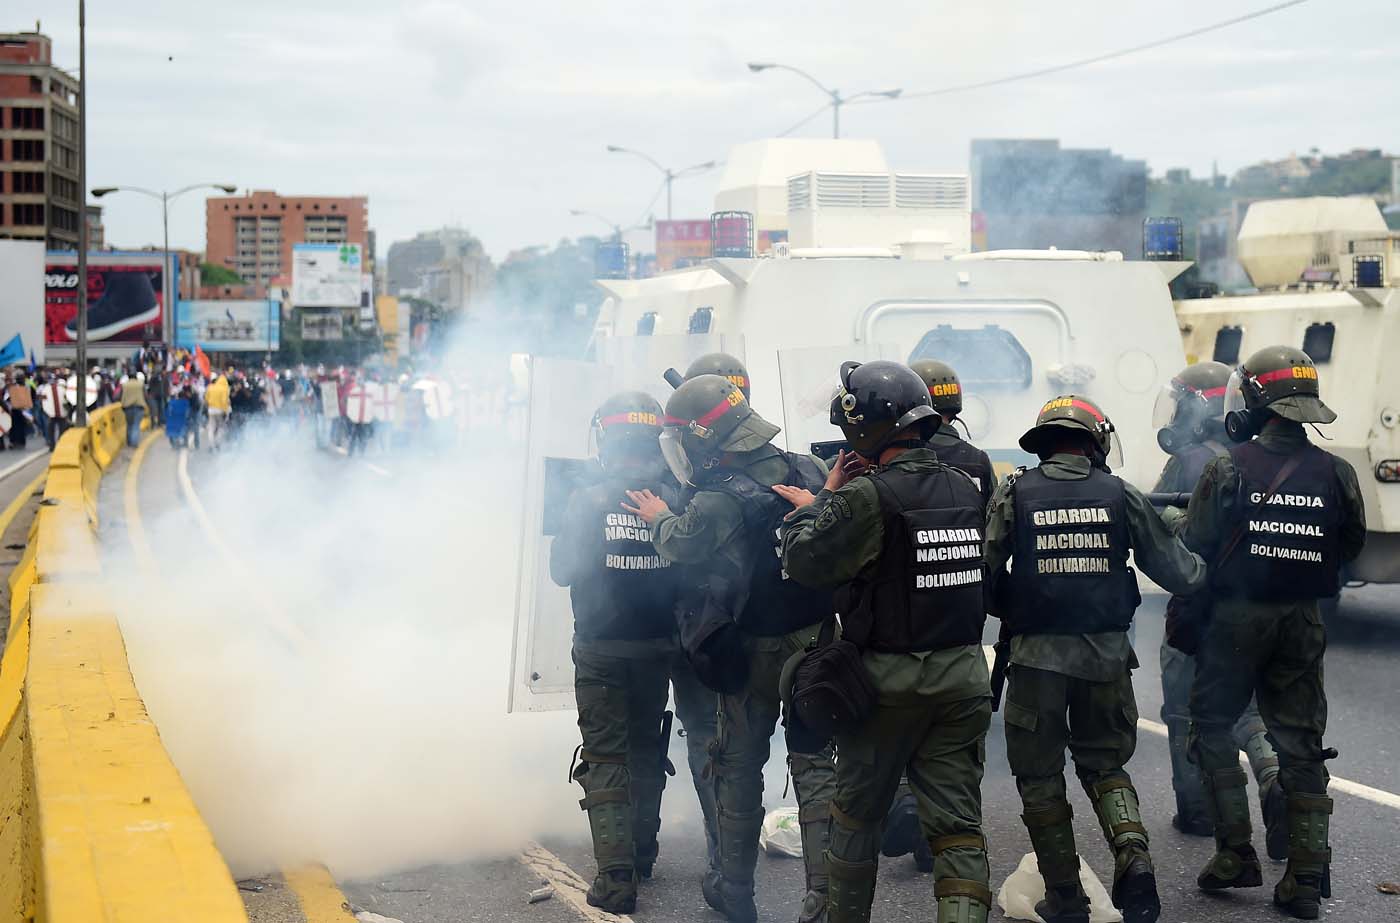 Opposition activists clash with riot police during a protest against Venezuelan President Nicolas Maduro, in Caracas on May 3, 2017. Venezuela's angry opposition rallied Wednesday vowing huge street protests against President Nicolas Maduro's plan to rewrite the constitution and accusing him of dodging elections to cling to power despite deadly unrest. / AFP PHOTO / RONALDO SCHEMIDT